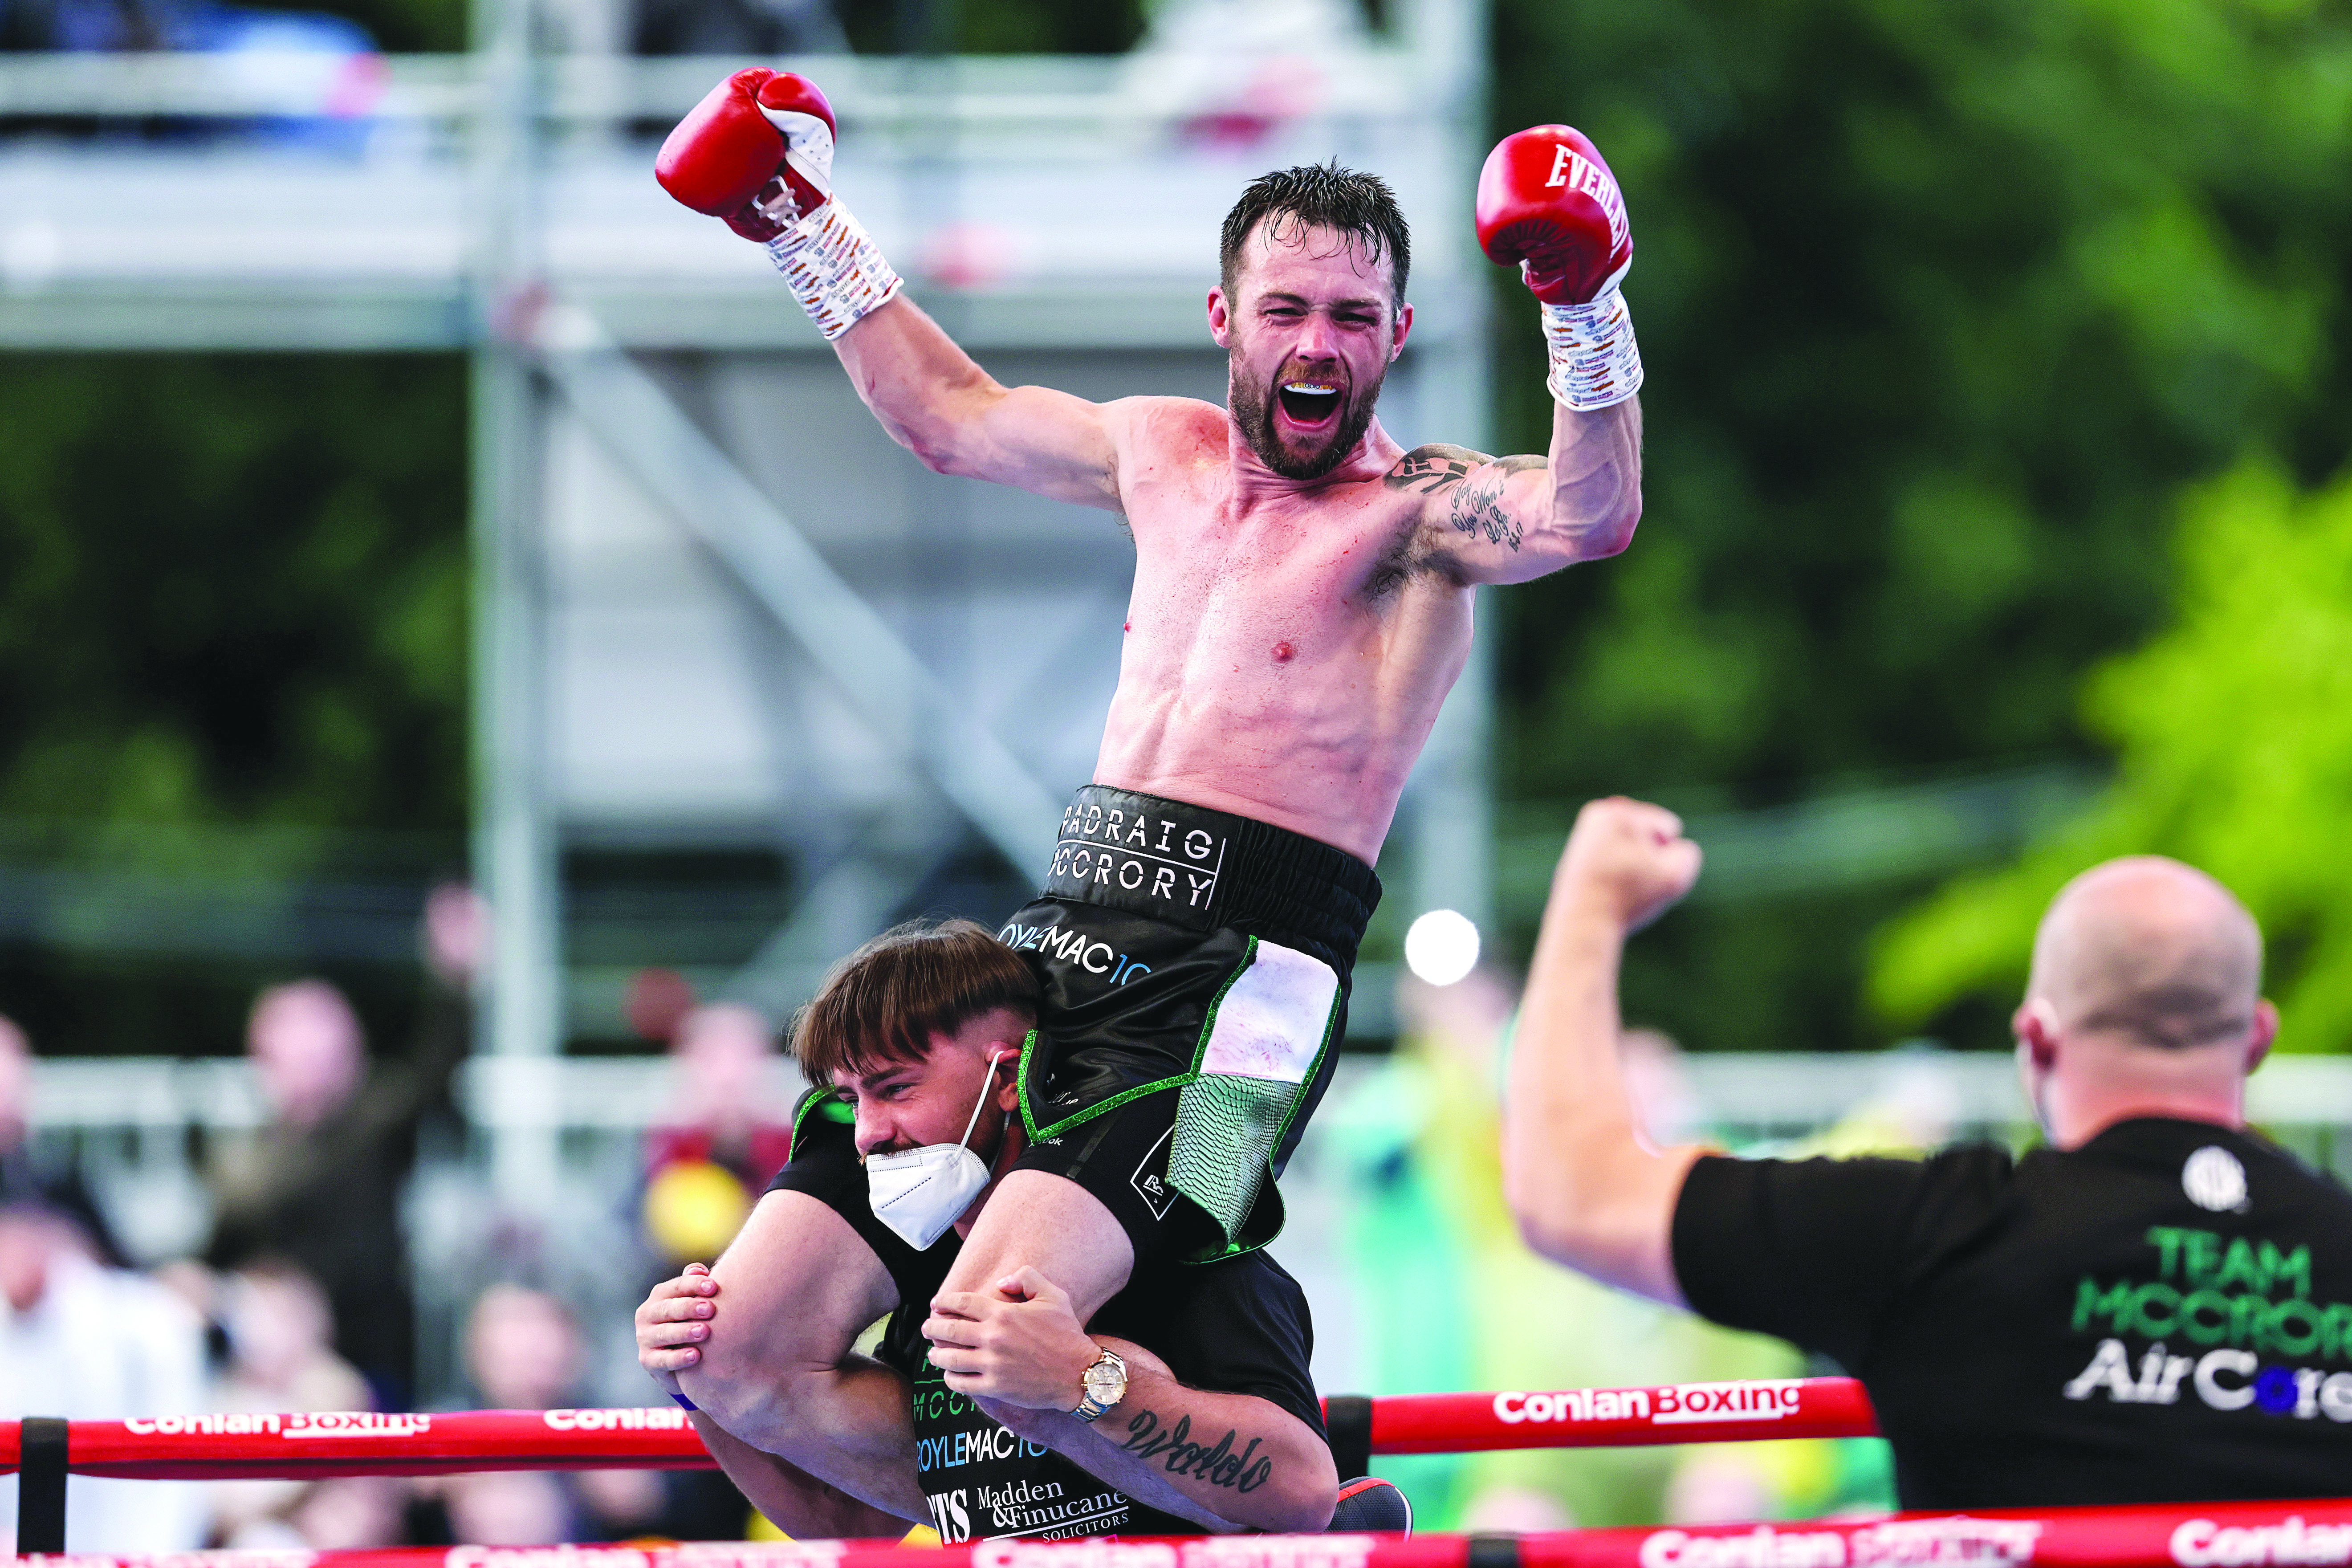 Padraig McCrory is chaired around the ring by trainer Dee Walsh following his win over Sergei Gorokhov at the Falls Park in August